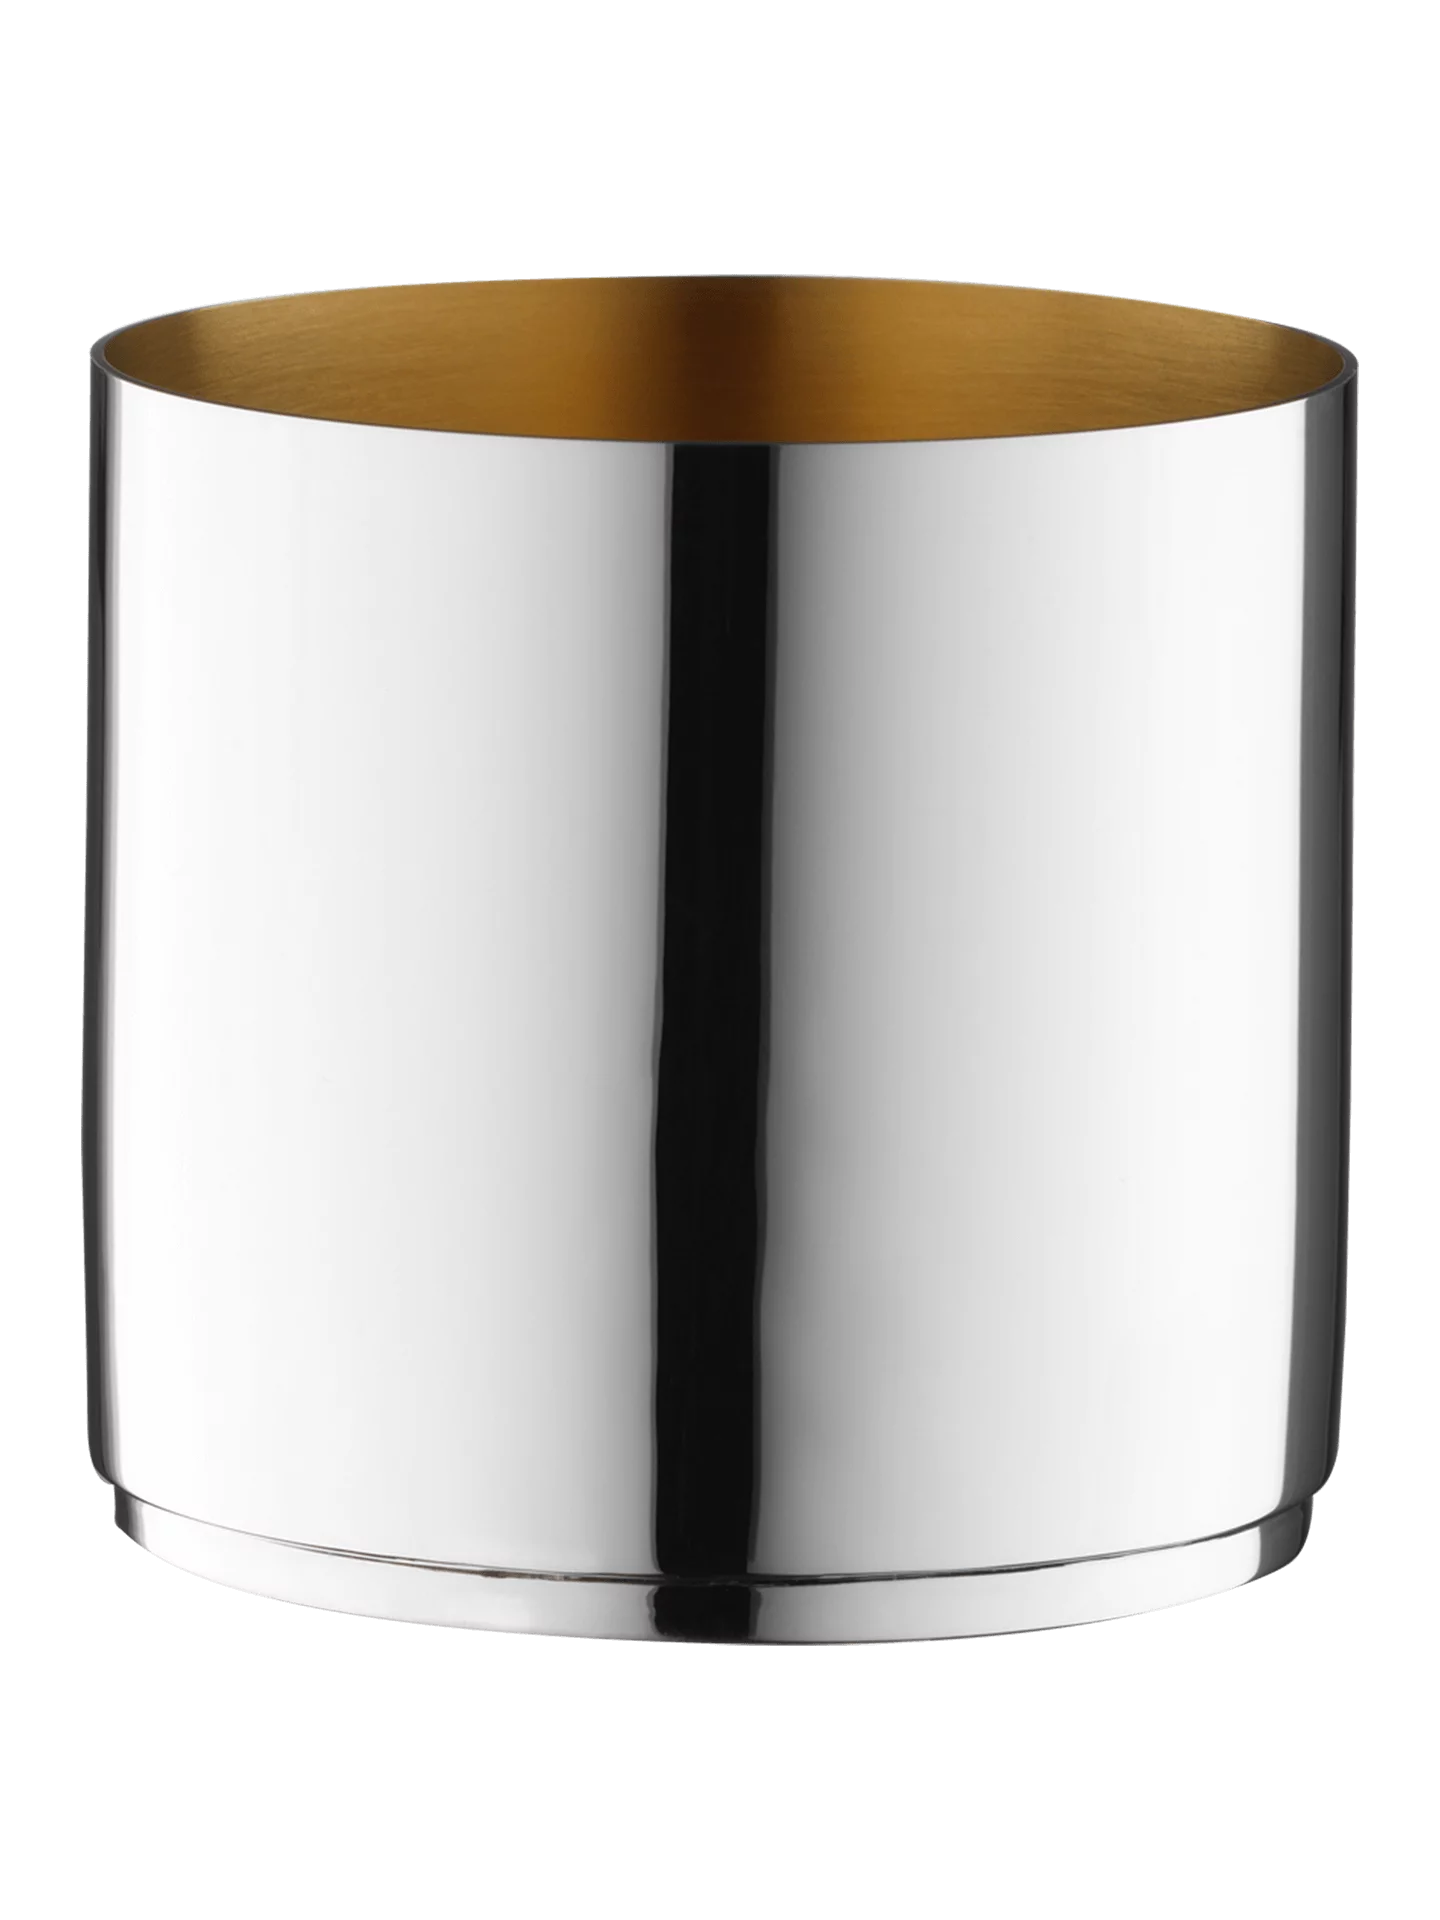 Dante Whiskey tumbler, inside gold (90g silverplated, gold-plated inside)